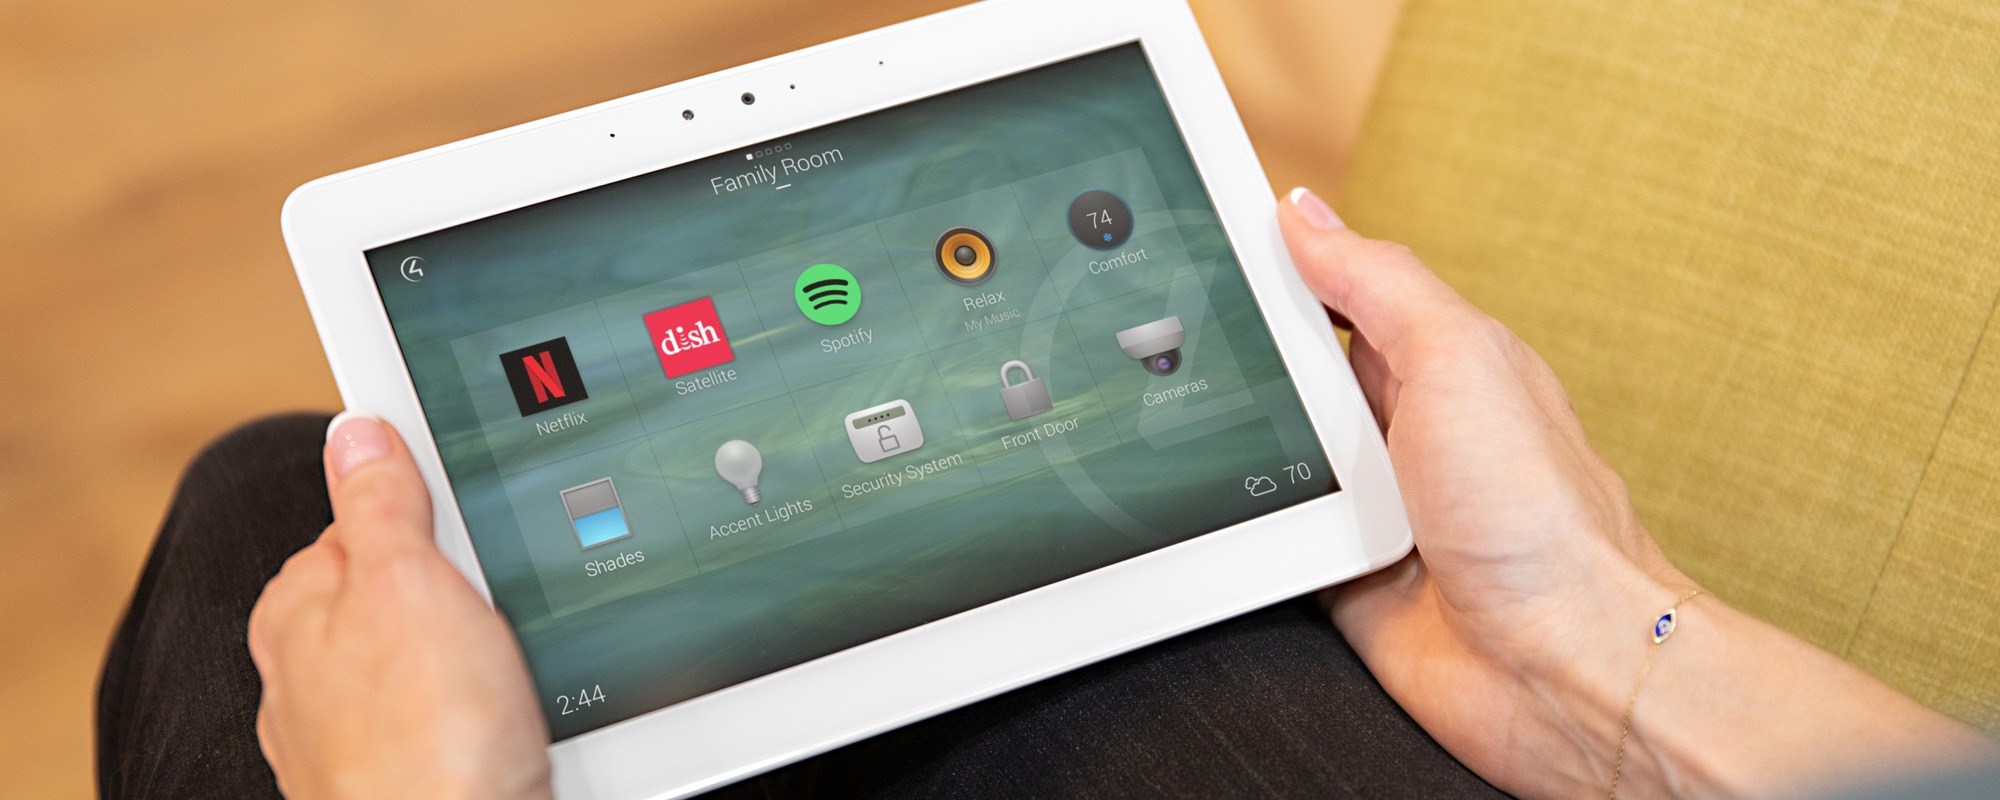 Home Automation control through your tablet. Includes lighting, music, temperature, security and much more.